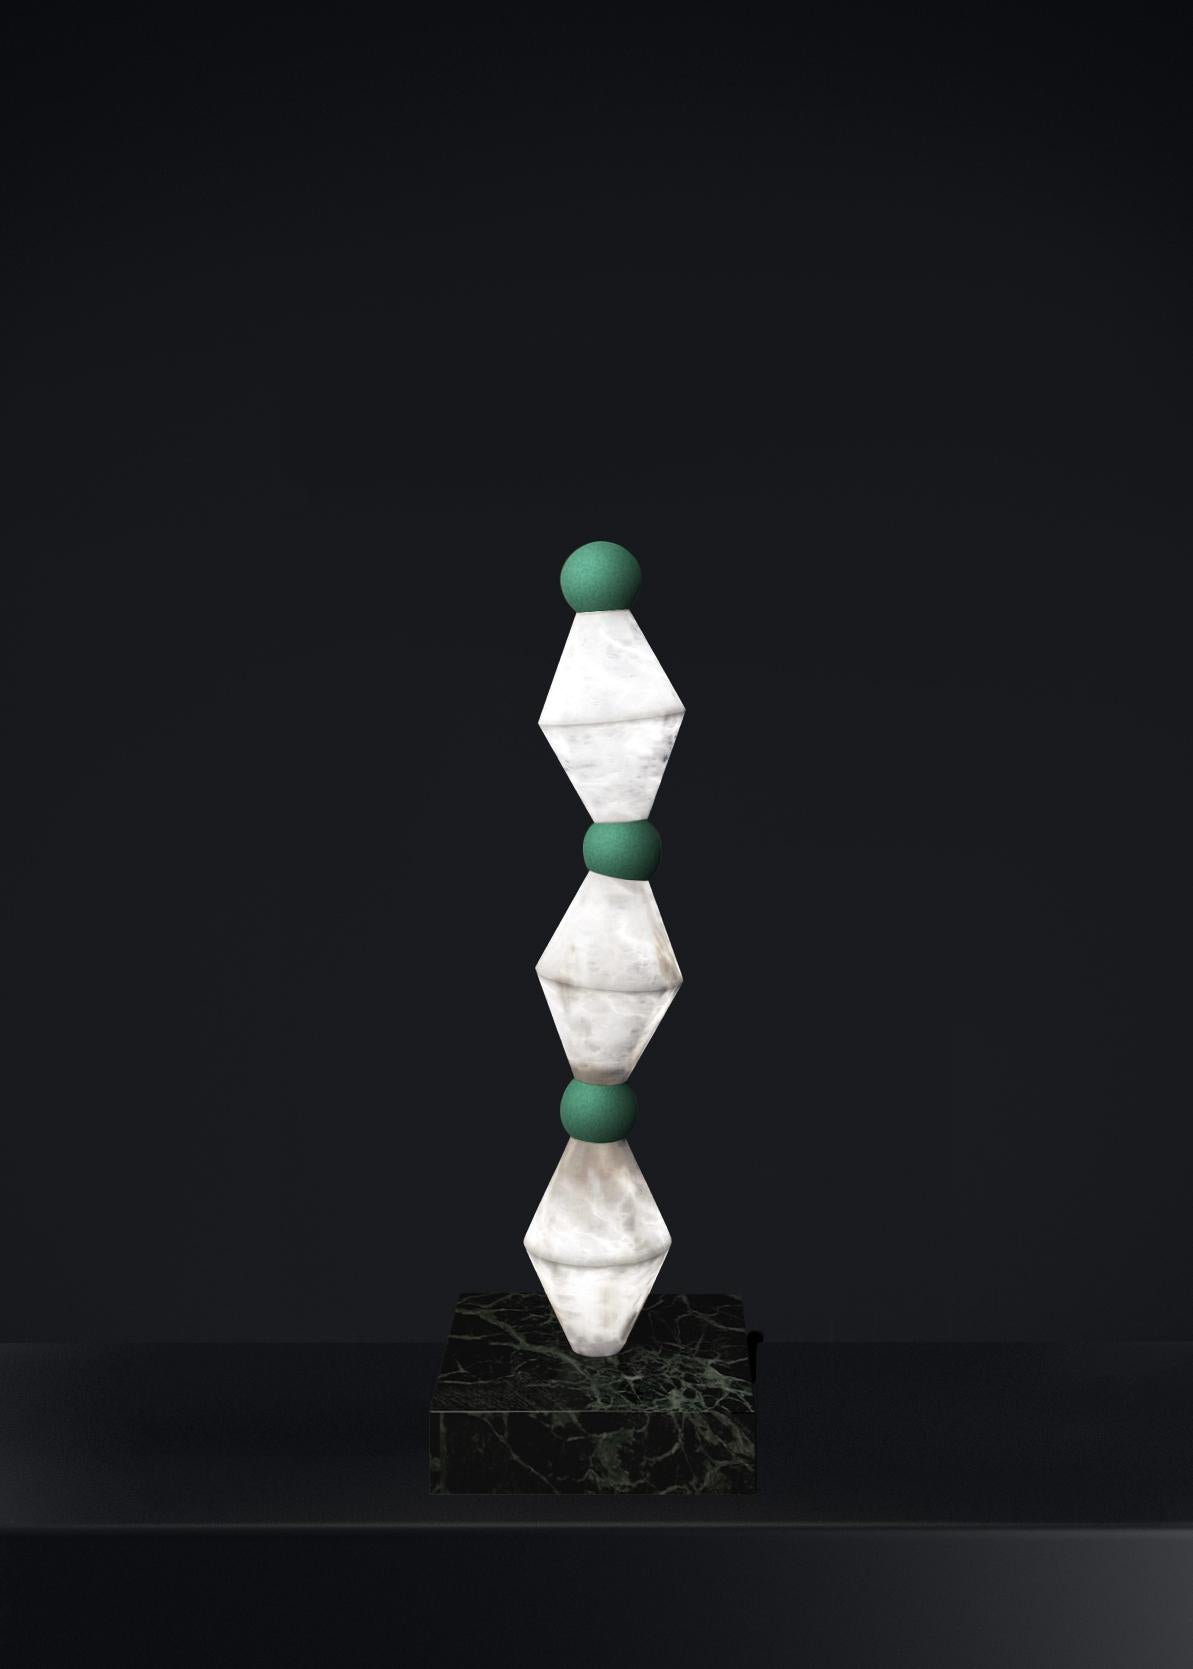 Chronos Freedom Green Table Lamp by Alabastro Italiano
Dimensions: D 15 x W 15 x H 71,5 cm.
Materials: White alabaster, marble and metal.

Available in different finishes: Shiny Silver, Bronze, Brushed Brass, Ruggine of Florence, Brushed Burnished,